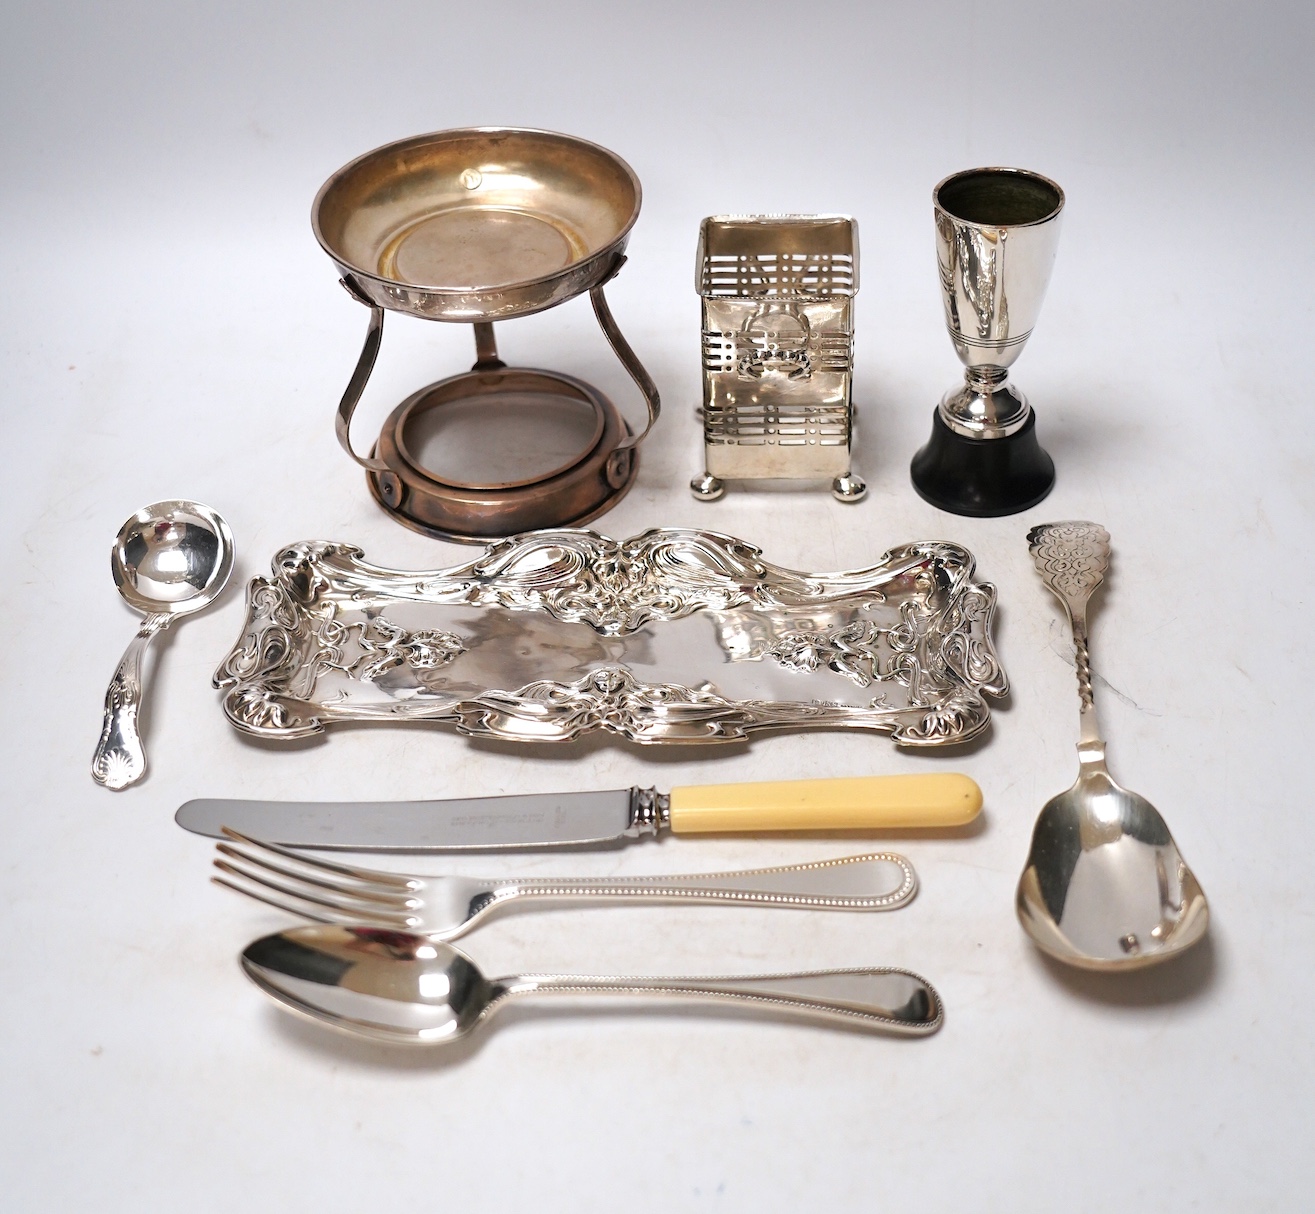 Assorted plated wares including a teapot with ebonised handle and an Art Nouveau style dish